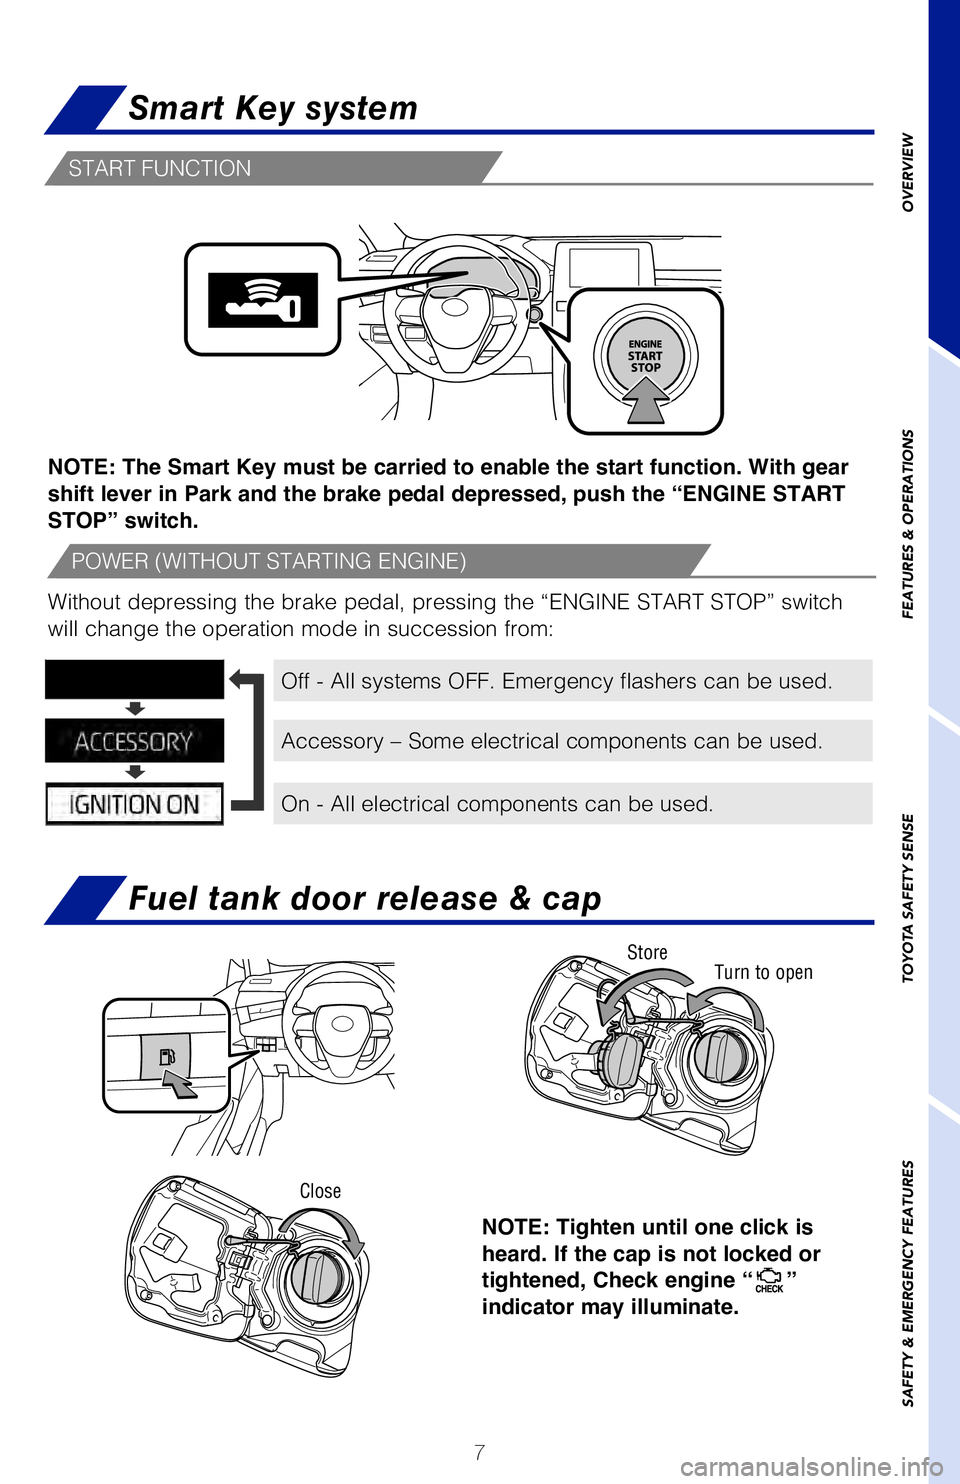 TOYOTA AVALON 2019  Owners Manual (in English) 7
Smart Key system
Fuel tank door release & cap
NOTE: If a door is not opened within 60 seconds of unlocking, all doors will relock for 
safety.
NOTE: The Smart Key must be carried to enable the start